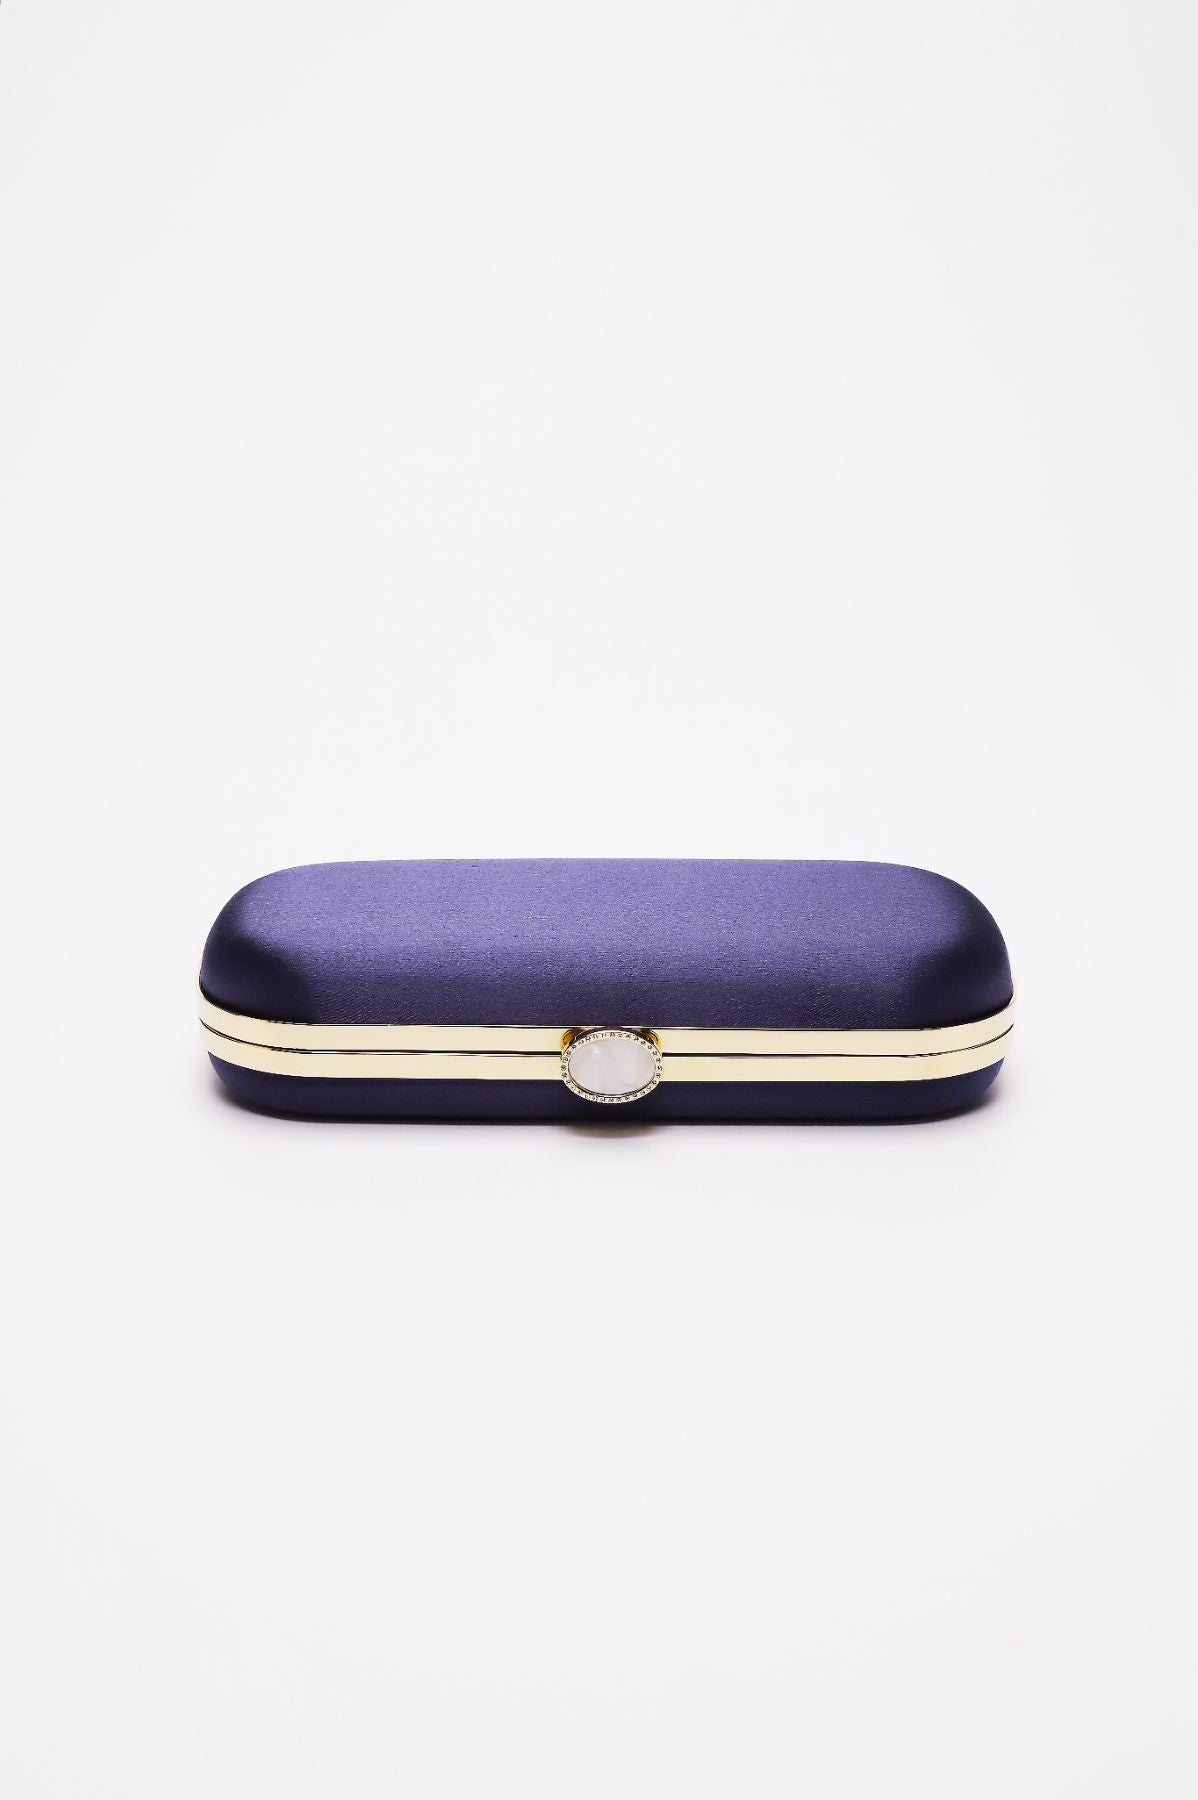 The Bella Rosa Collection's Navy Blue Petite Bella Clutch with white trim and central clasp on a white background.